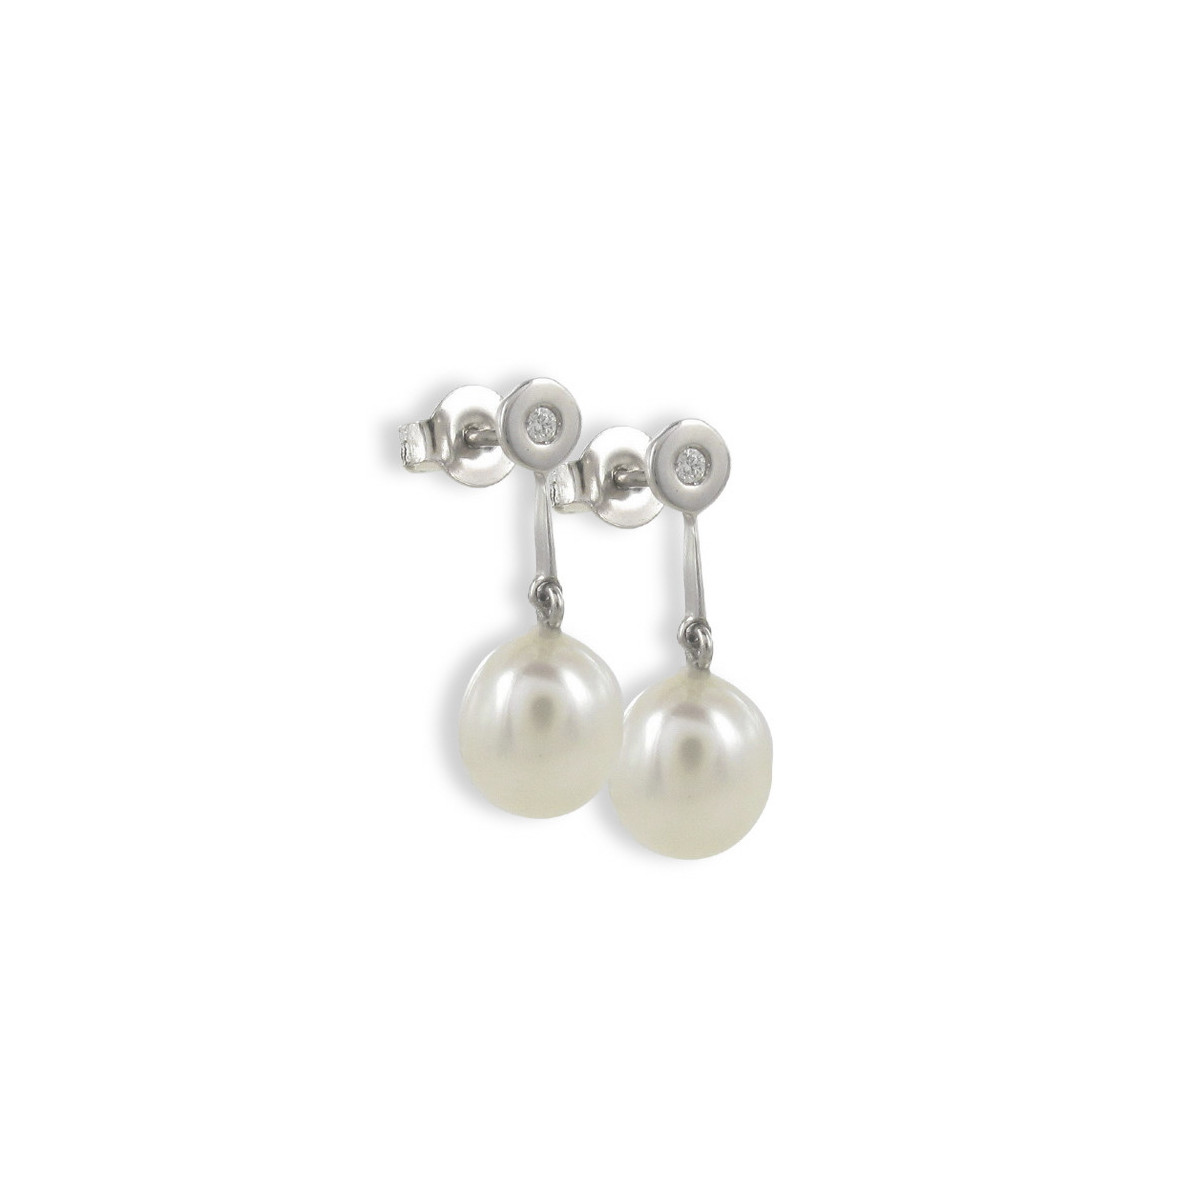 GOLD EARRINGS WITH 2 DIAMONDS AND PEARLS